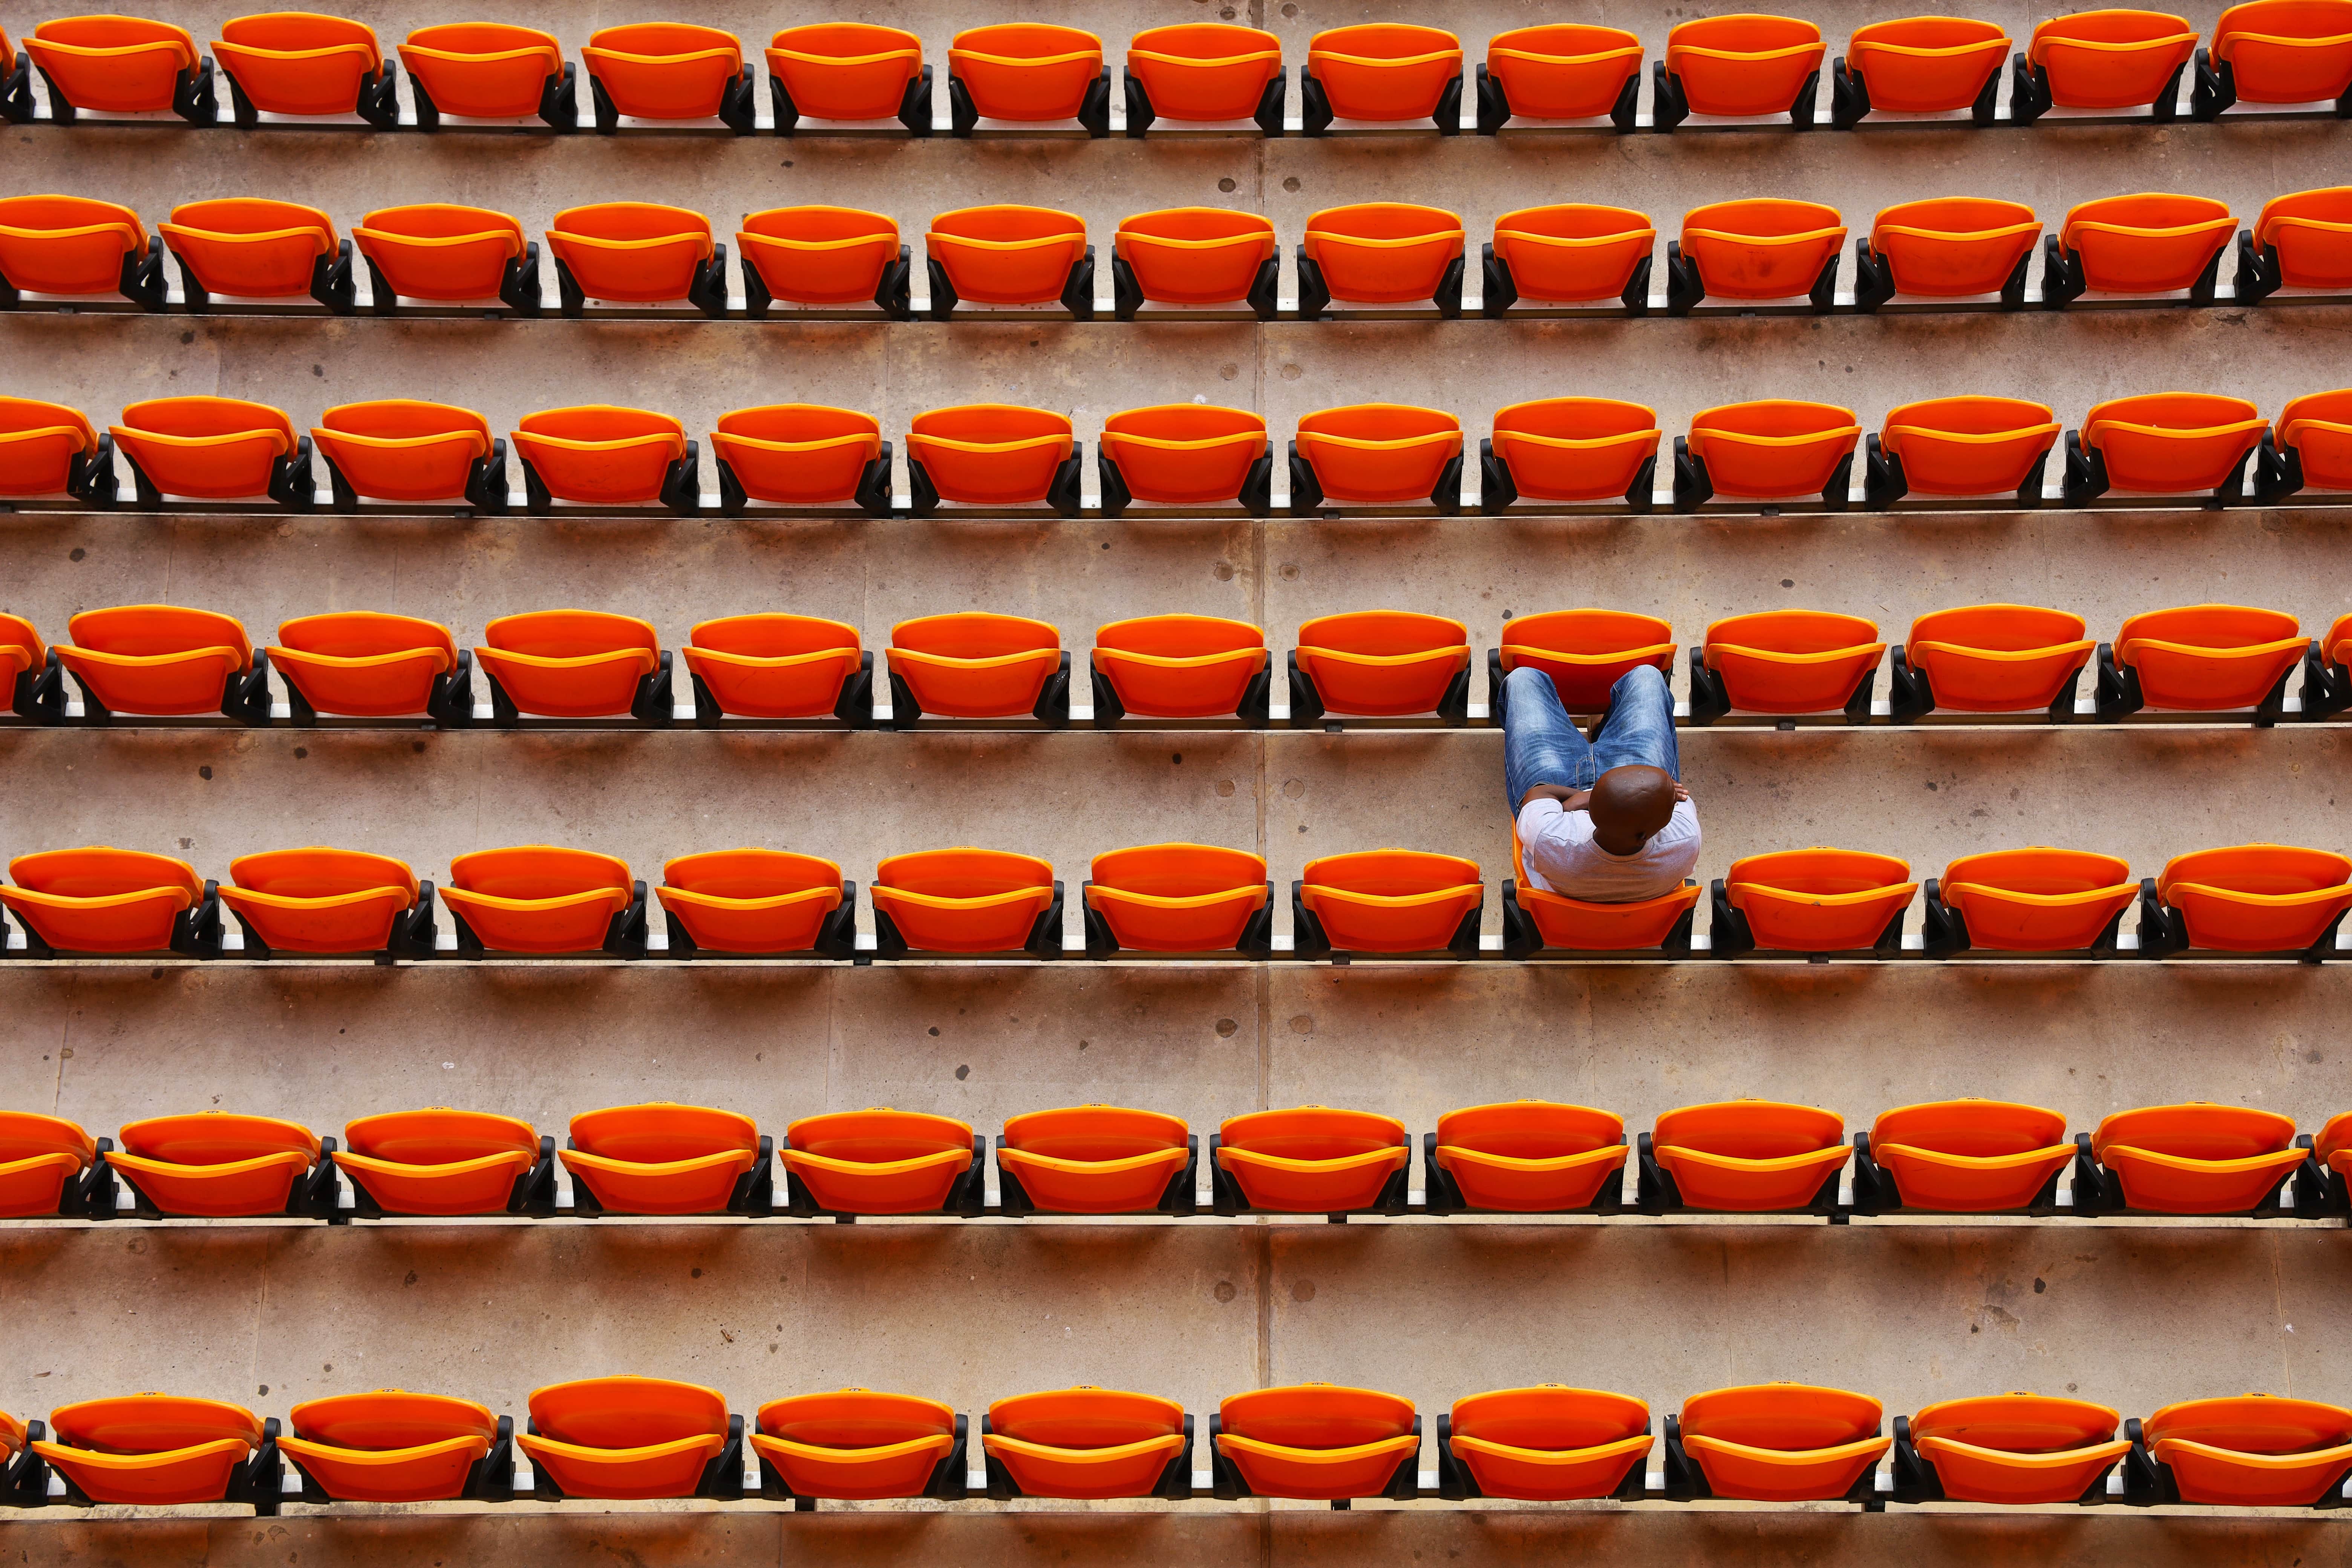 Rows of repeating orange stadium seats with one man sitting